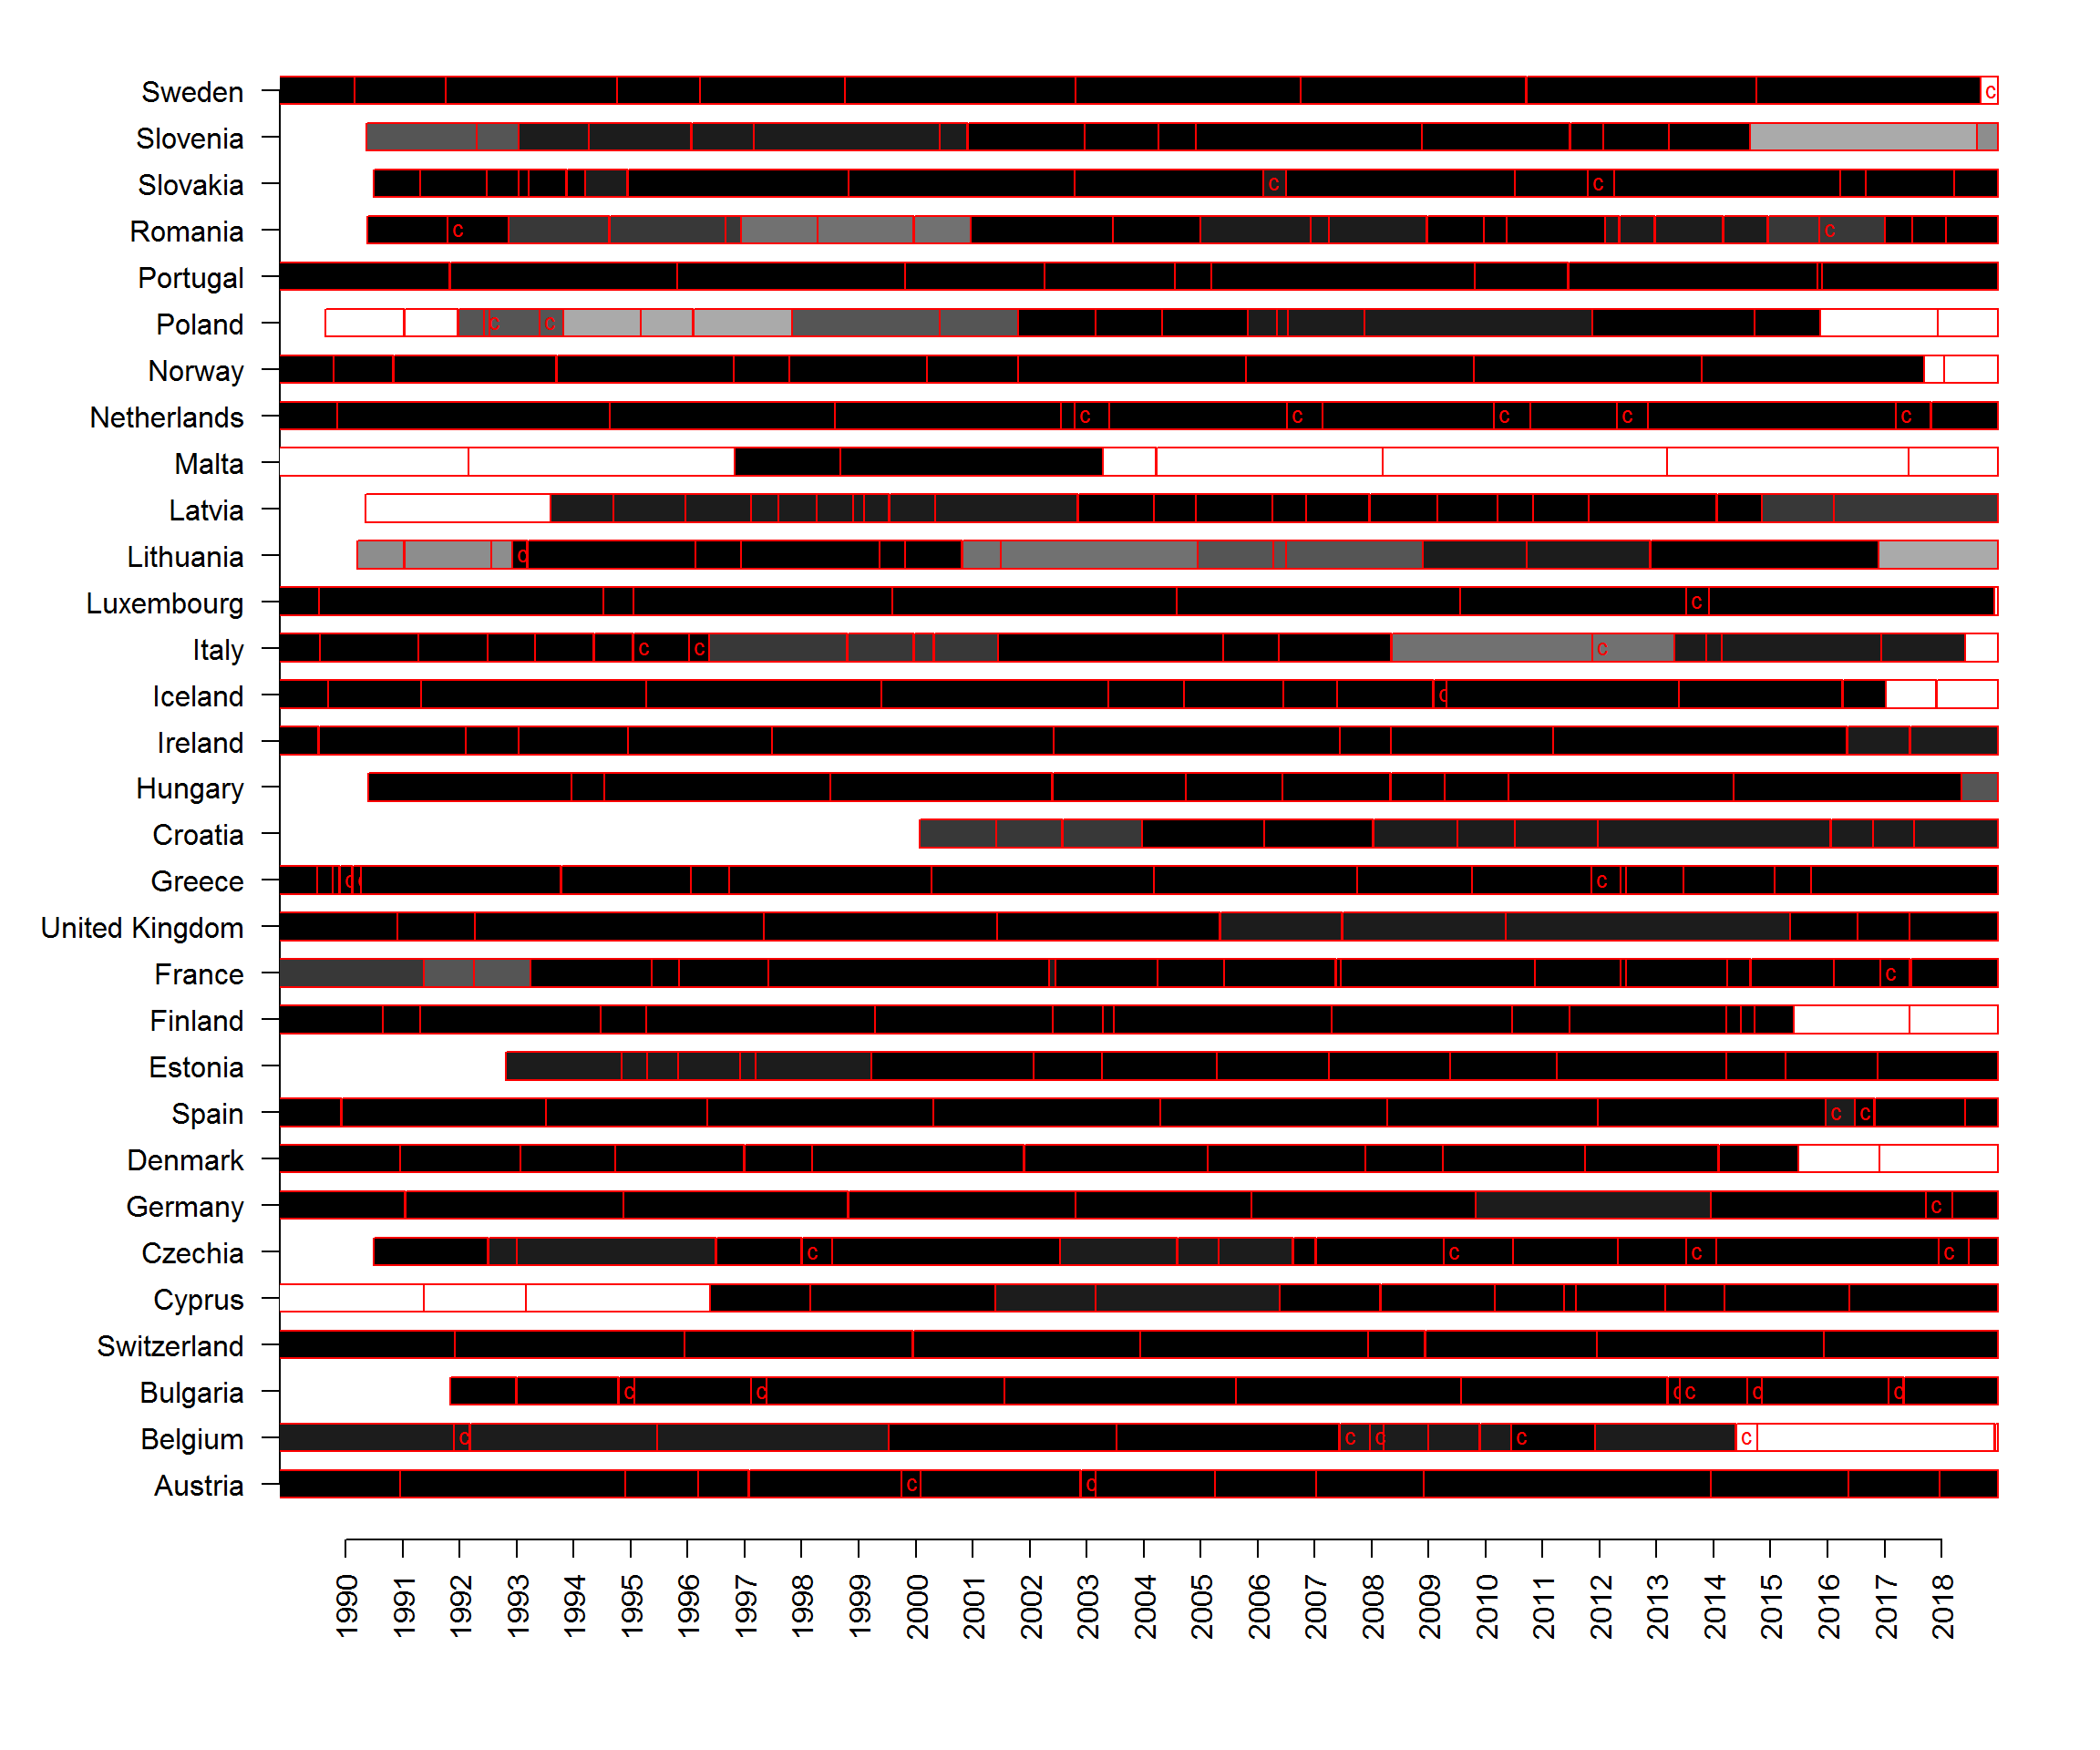 Government Positions From Party Level Data